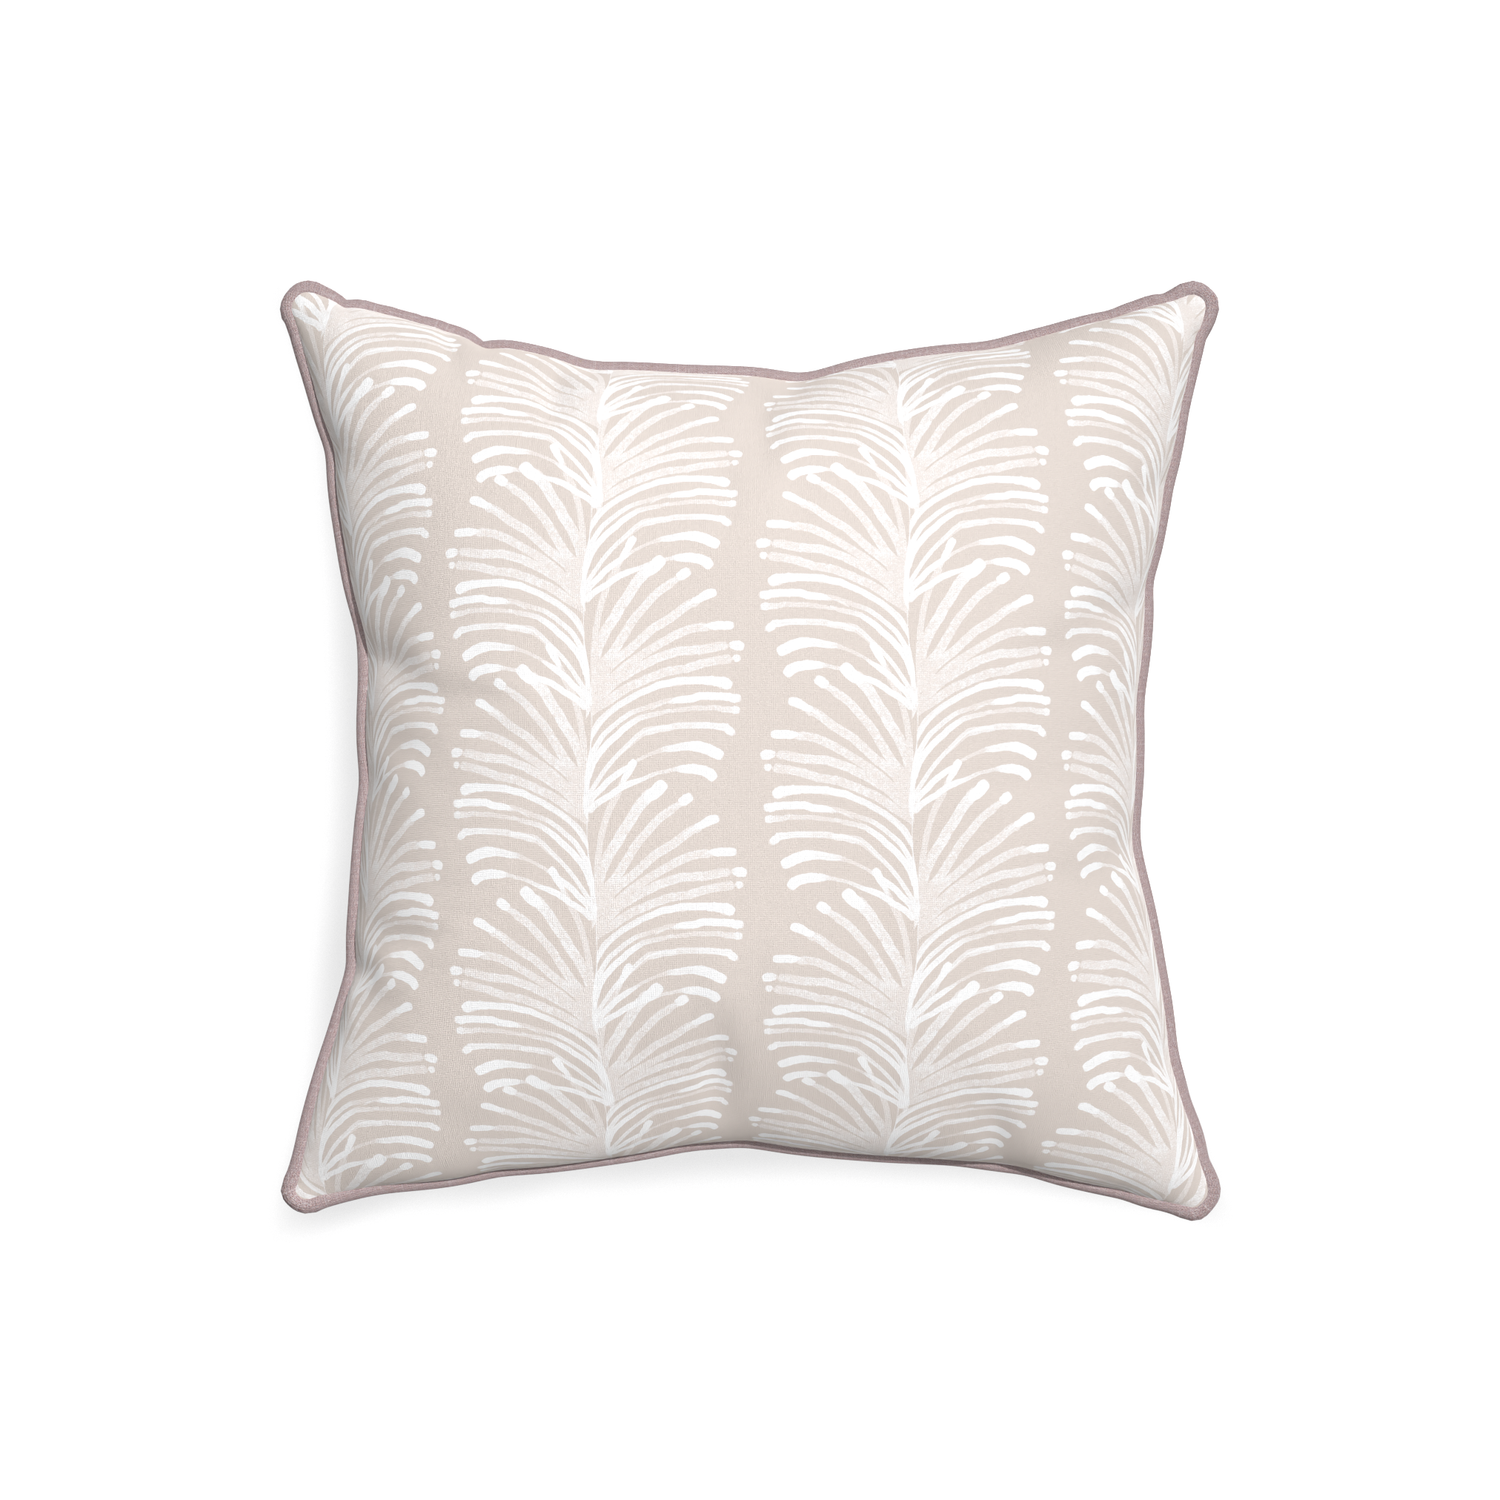 20-square emma sand custom sand colored botanical stripepillow with orchid piping on white background